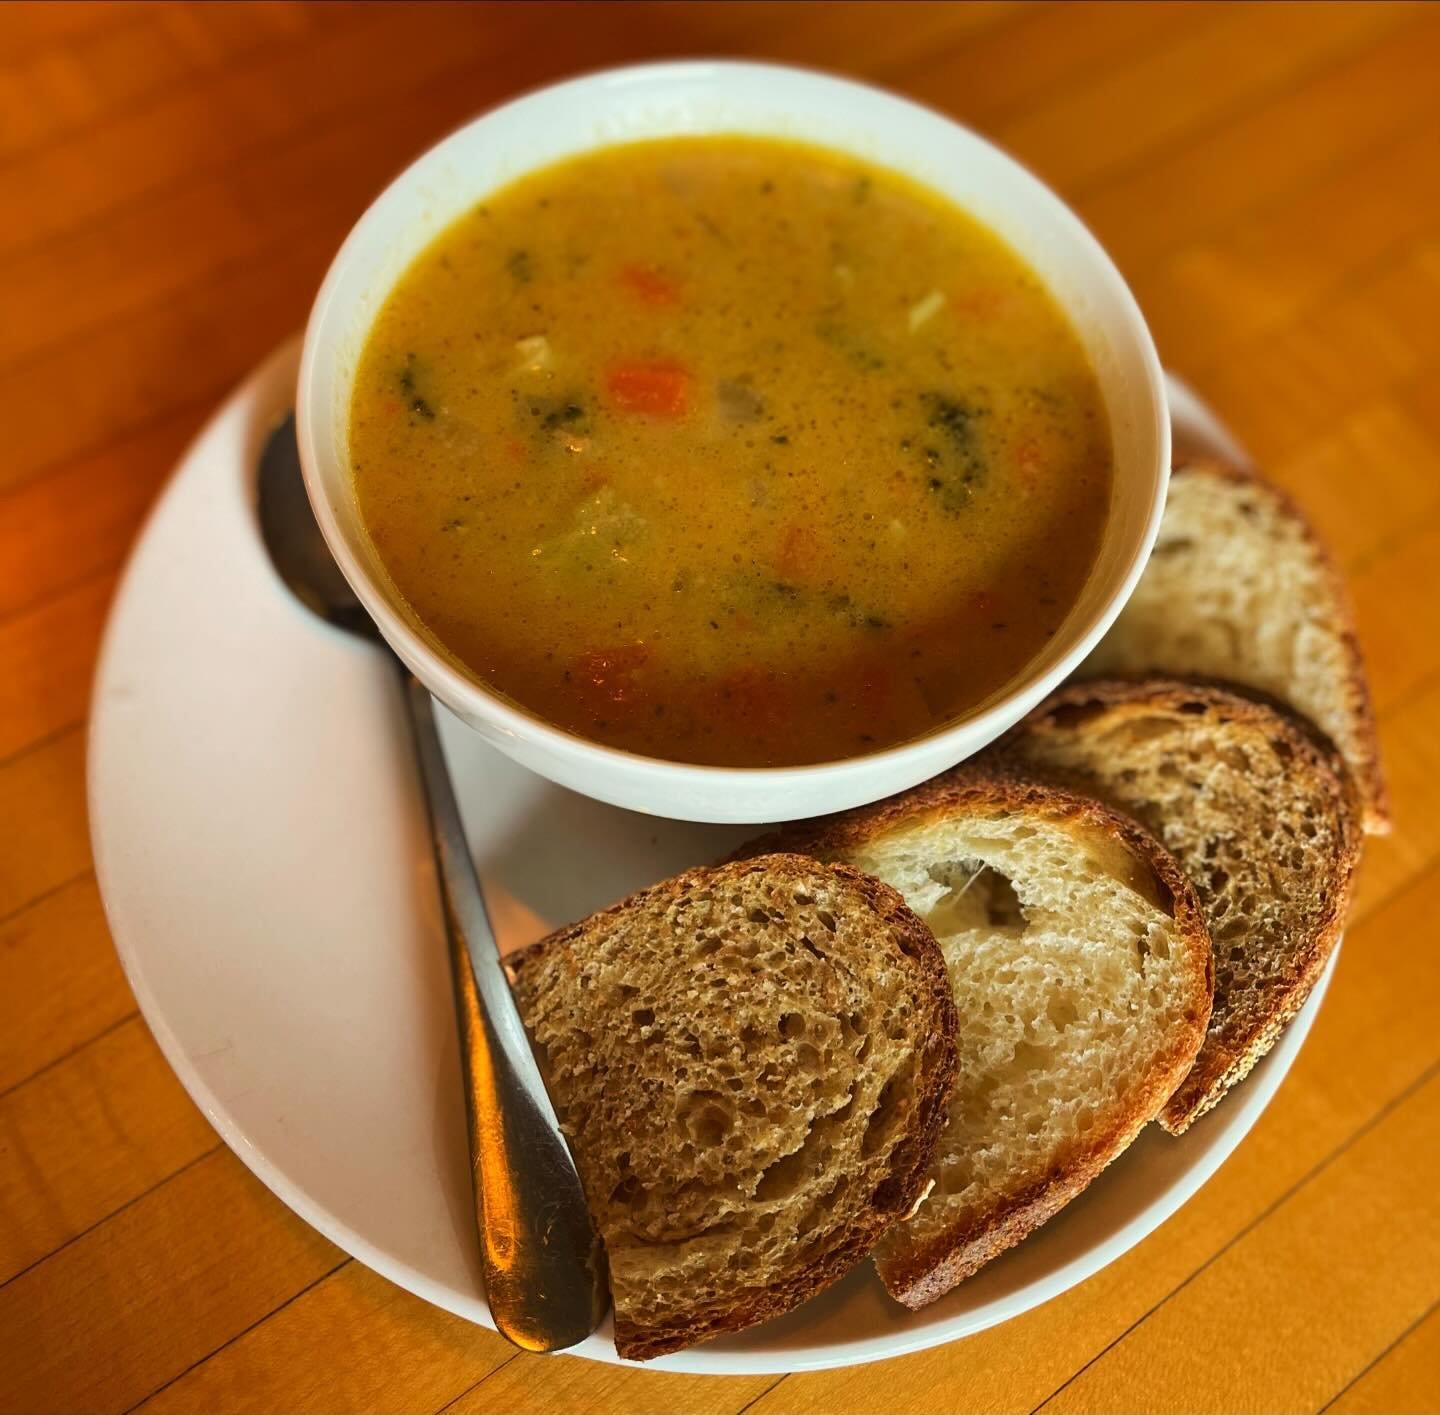 Only a couple more weeks of soup!

#soup #soupseason #soups #bakery #bakeries #cafe #madefromscratch #madewithlove #broccoli #broccolicheddarsoup #hoodriver #hoodriveroregon #oregon #pnw #pinestreetbakeryhoodriver